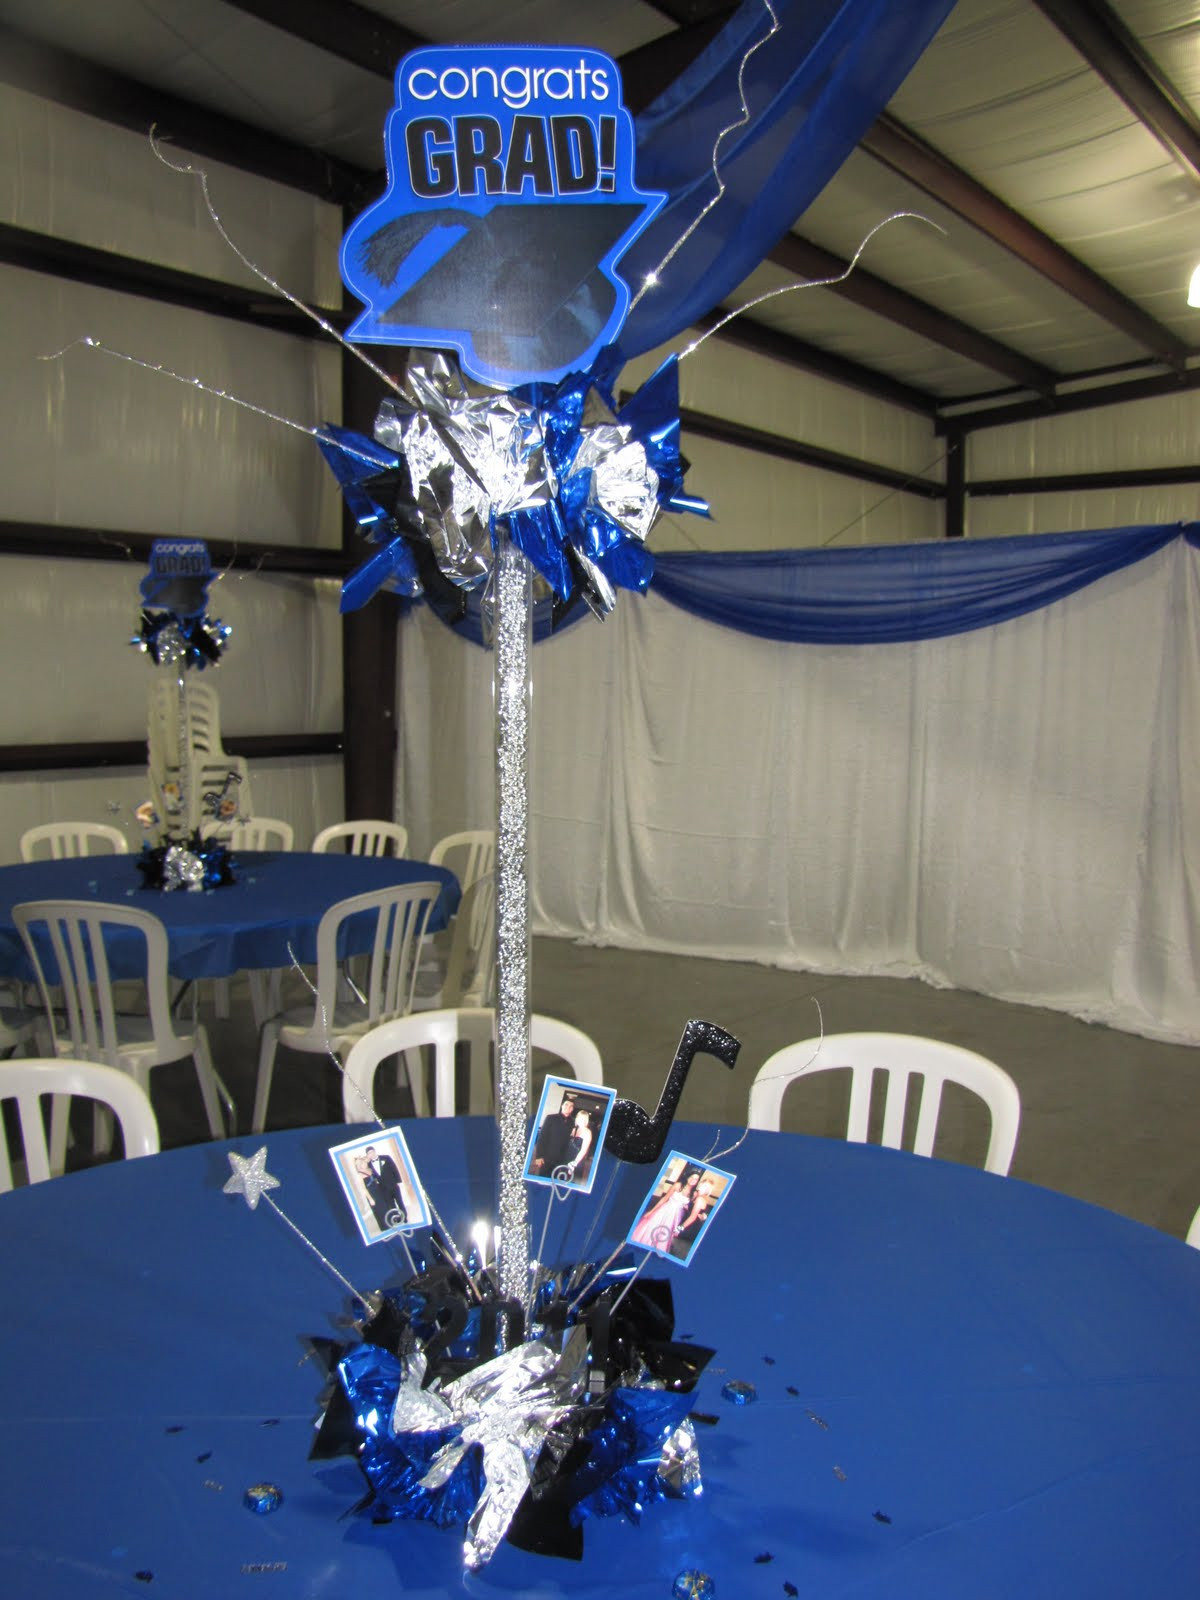 Centerpiece Graduation Party Ideas
 Party People Event Decorating pany Stephanie s